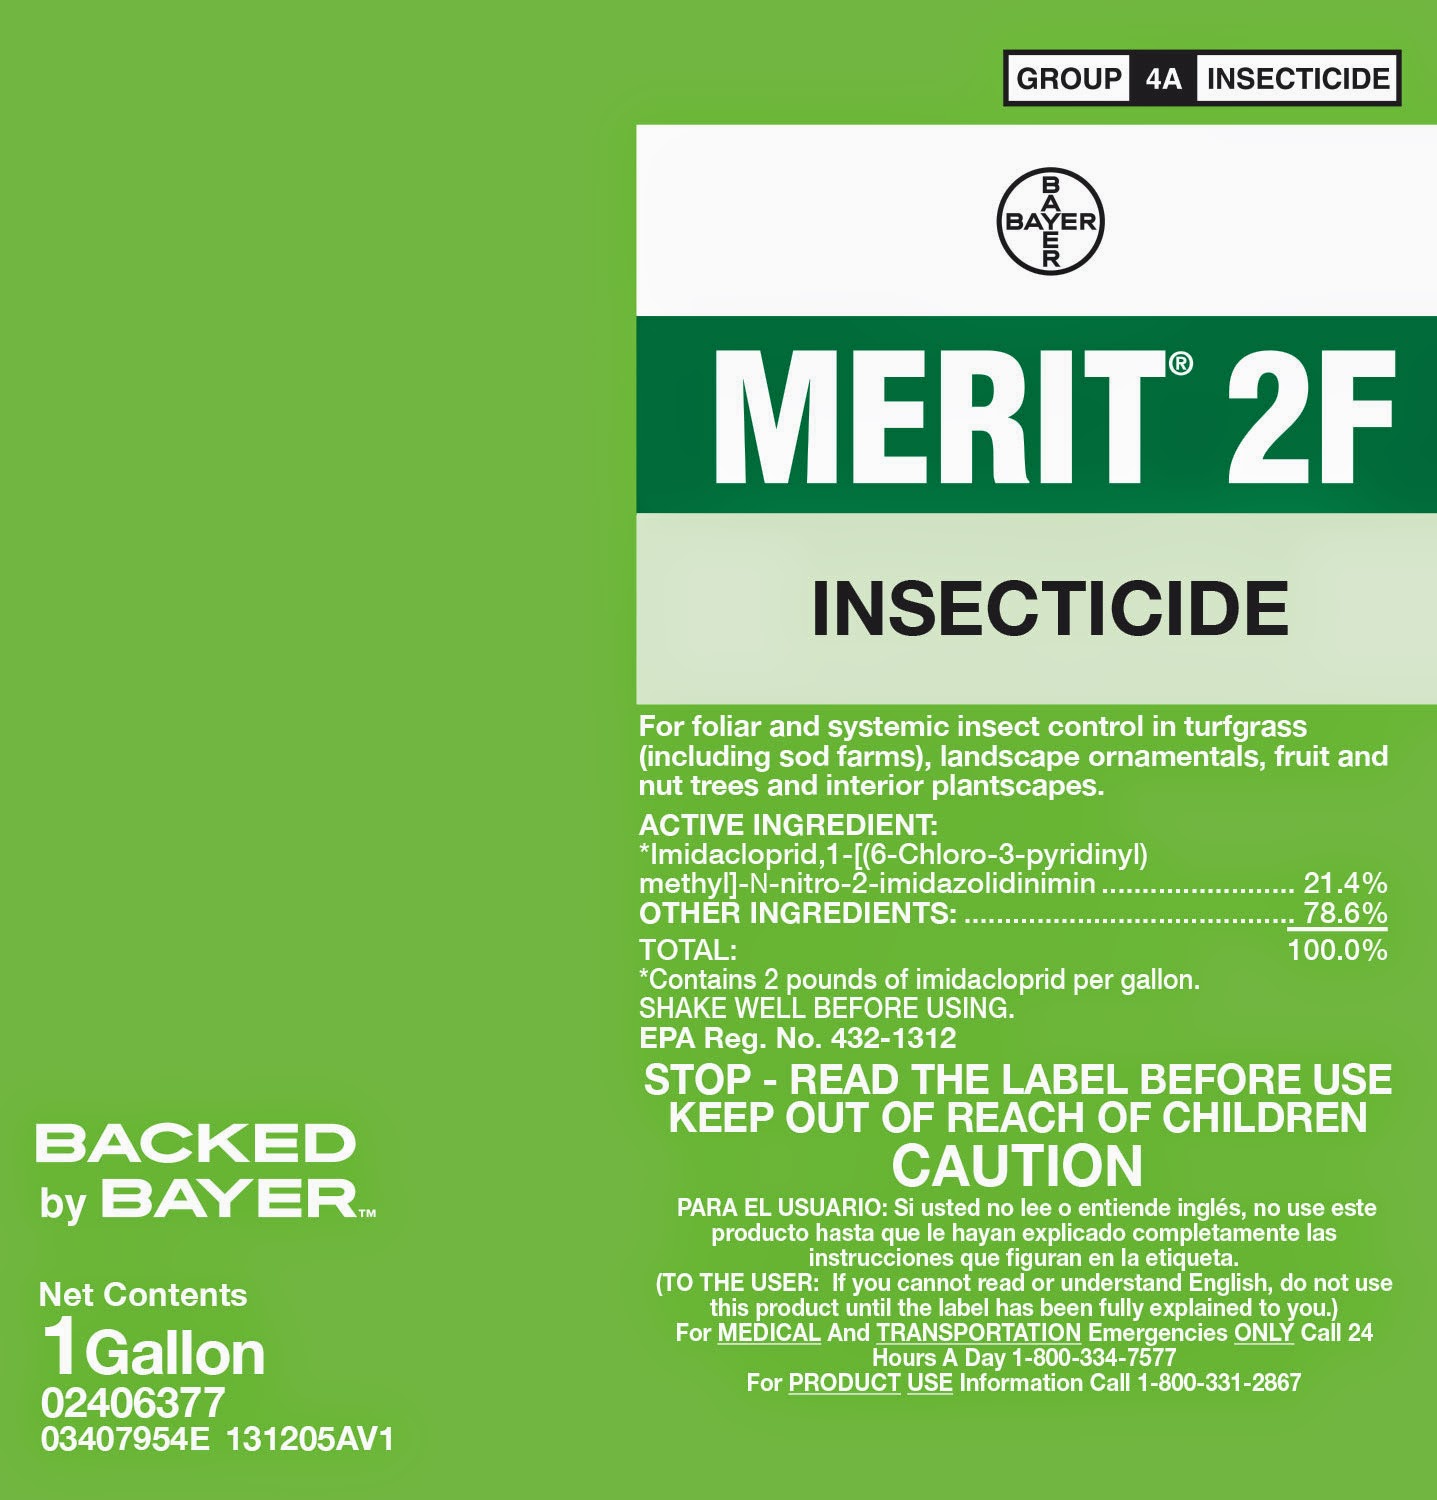 merit label for insecticide, for one gallon, made by Bayer.